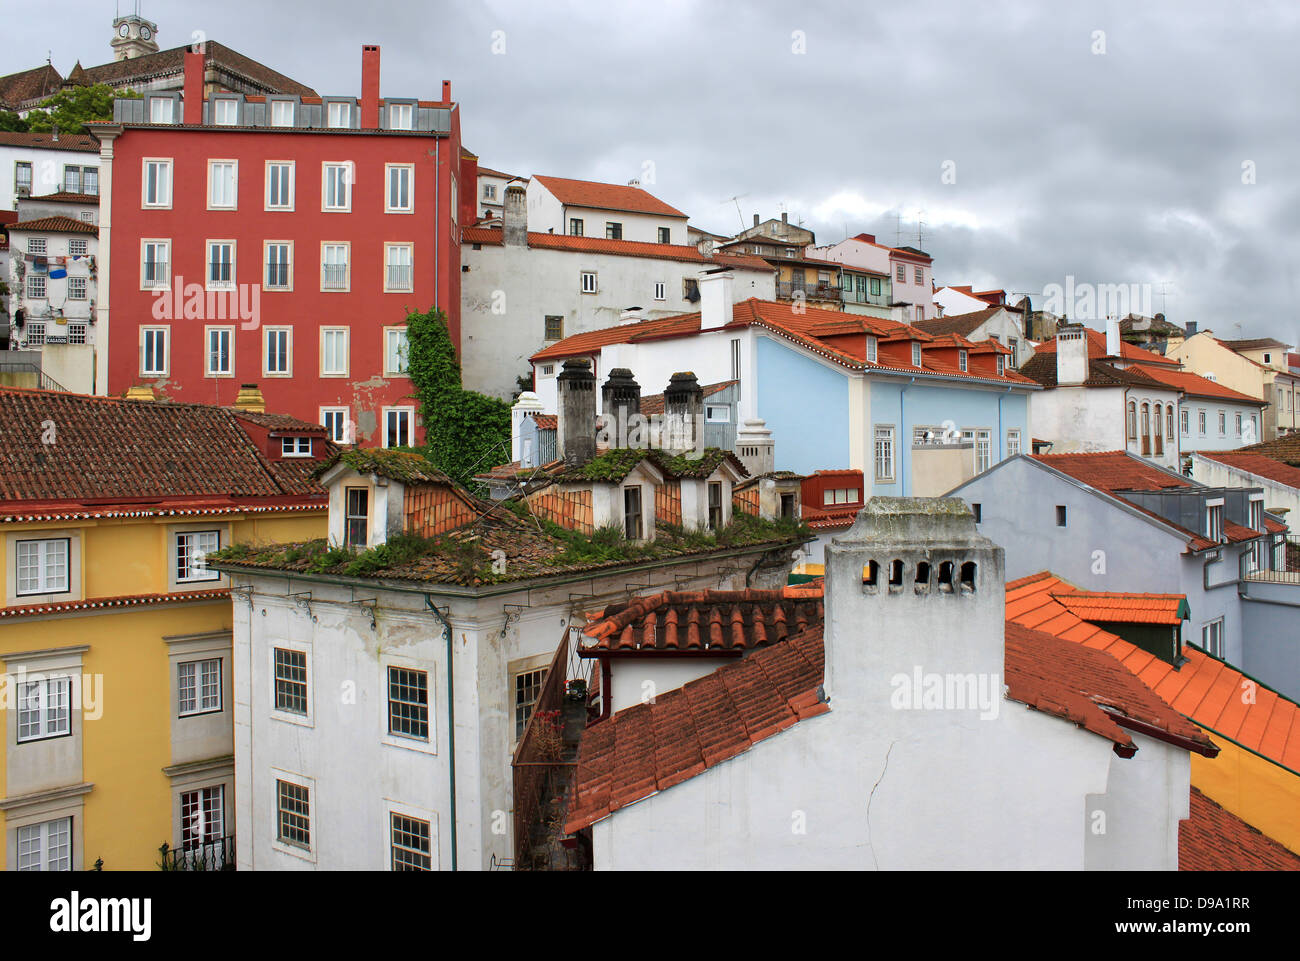 Colorful buildings and rooftops of Coimbra, Portugal under cloudy stormy skies Stock Photo